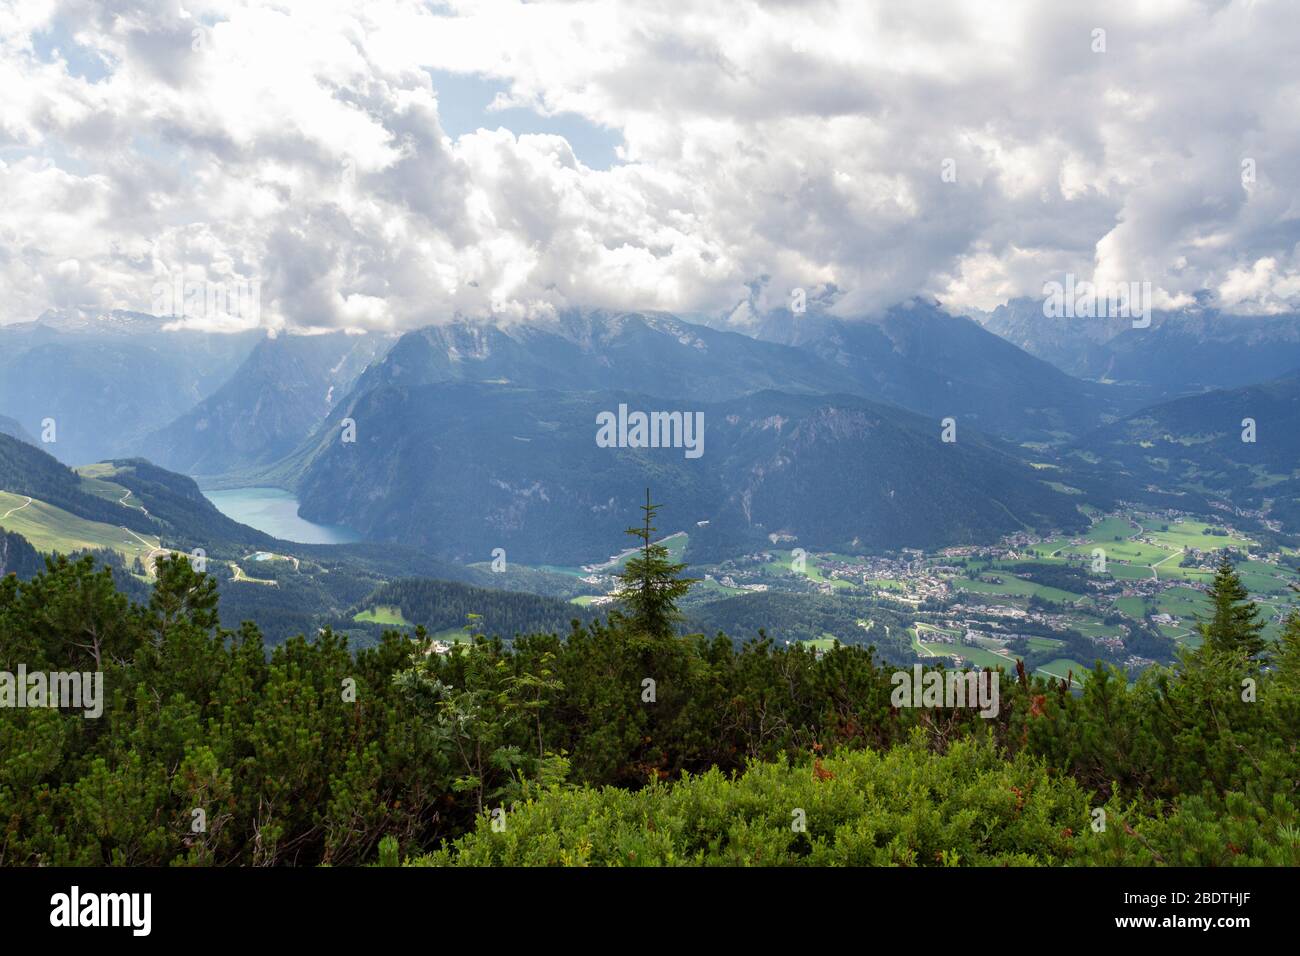 Panoramic view towards Königssee from the Eagle's Nest, Berchtesgaden, Bavaria, Germany. Stock Photo